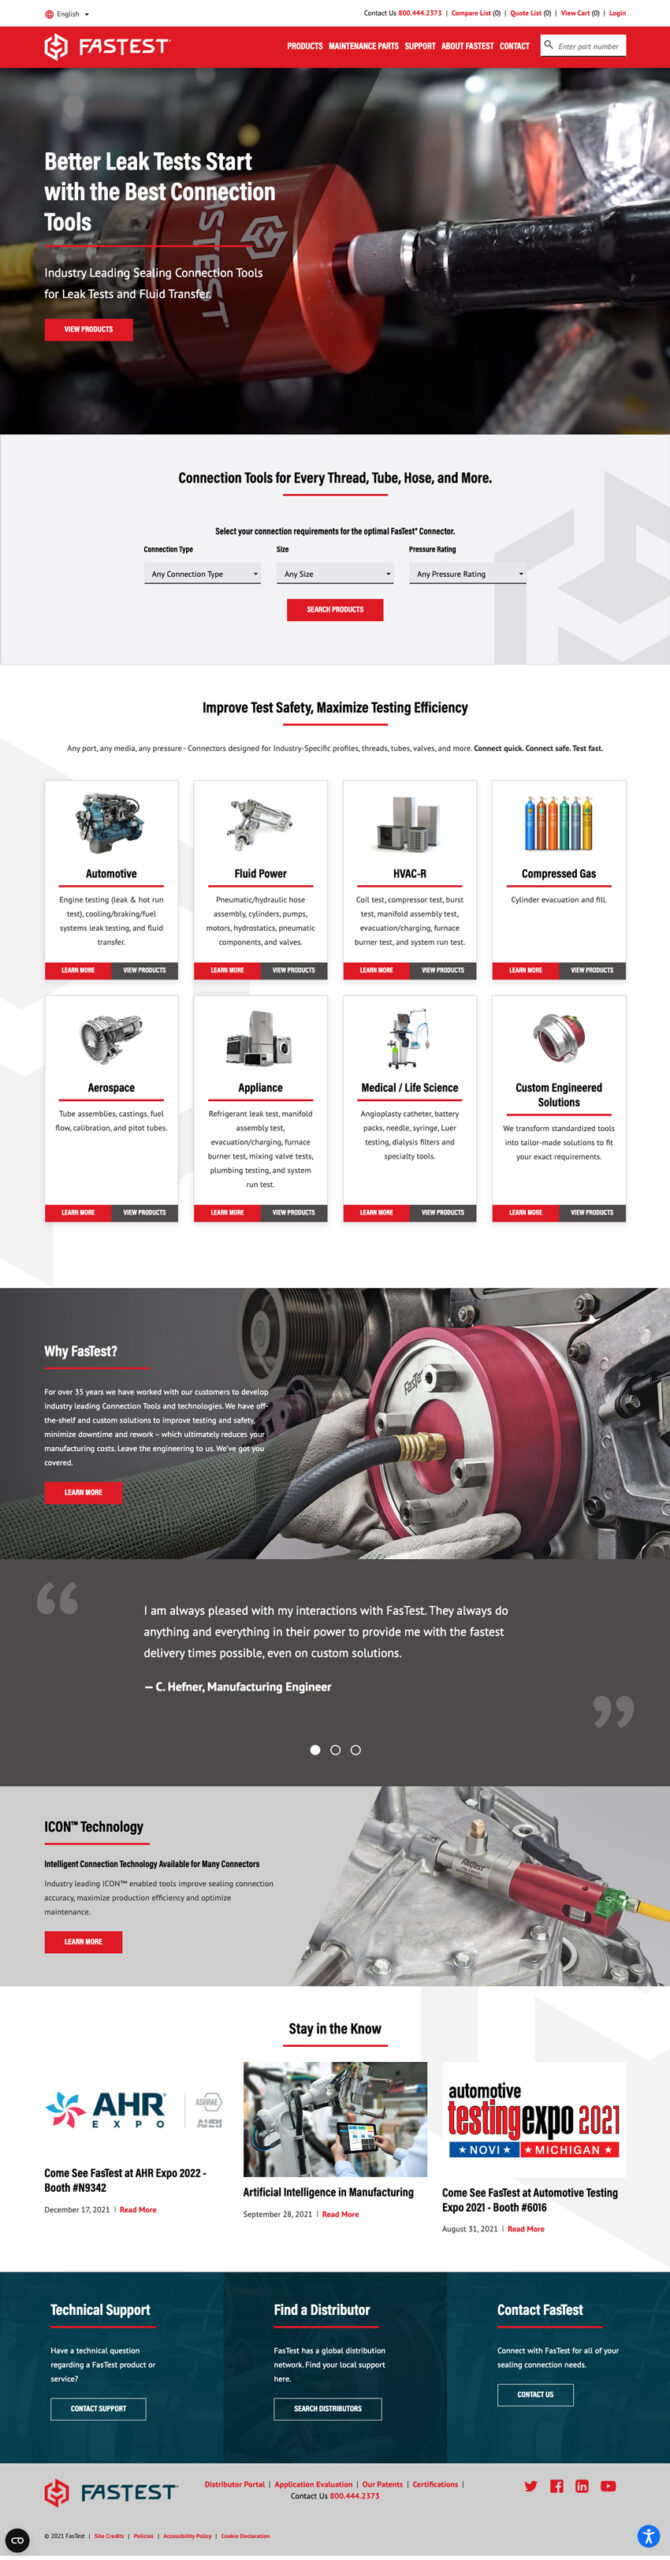 Manufacturing web design example: FasTest's website homepage